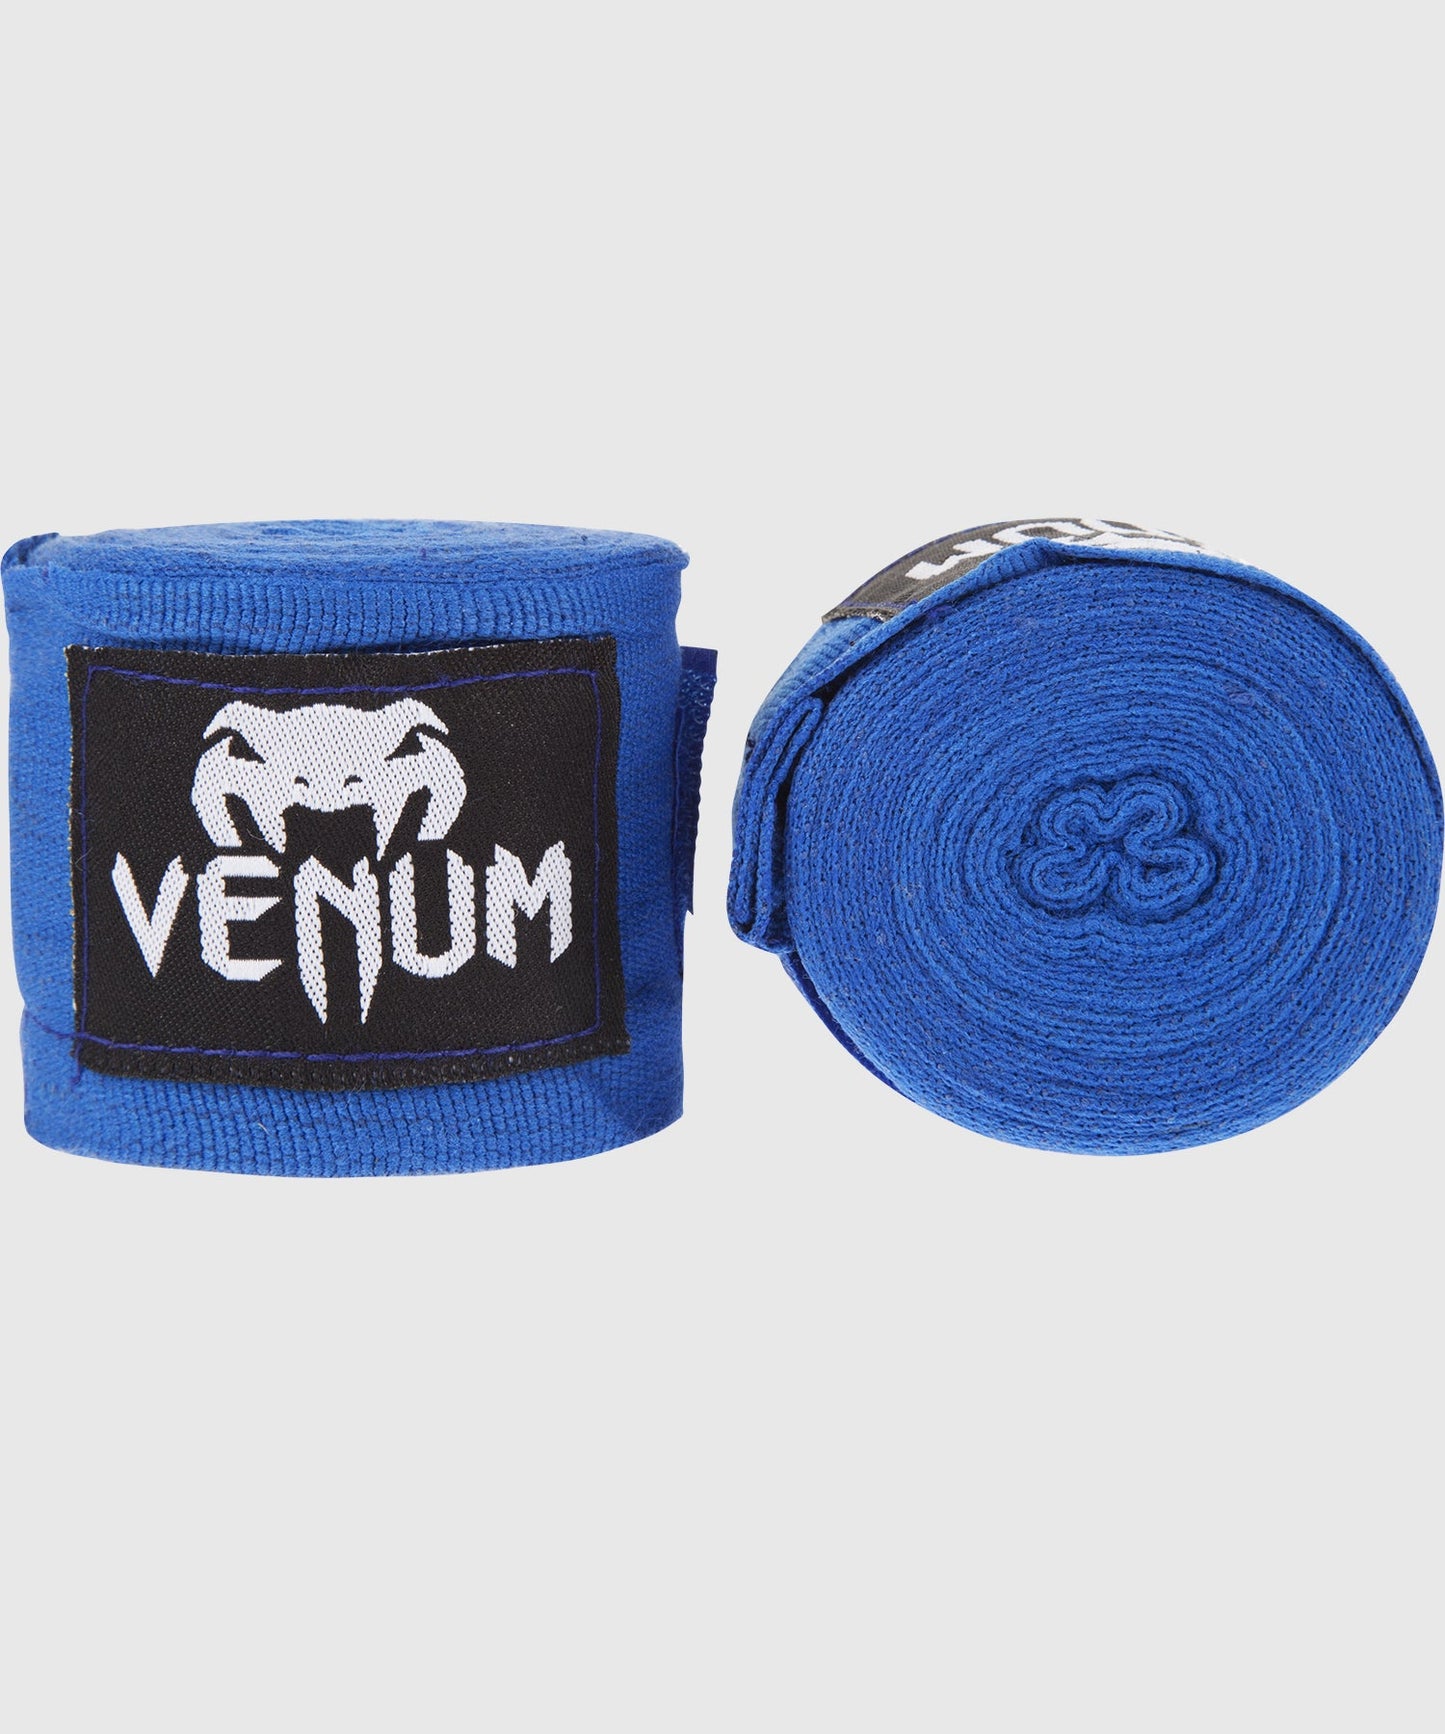 Venum Kontact Boxing Hand Wraps - Blue - 98 in